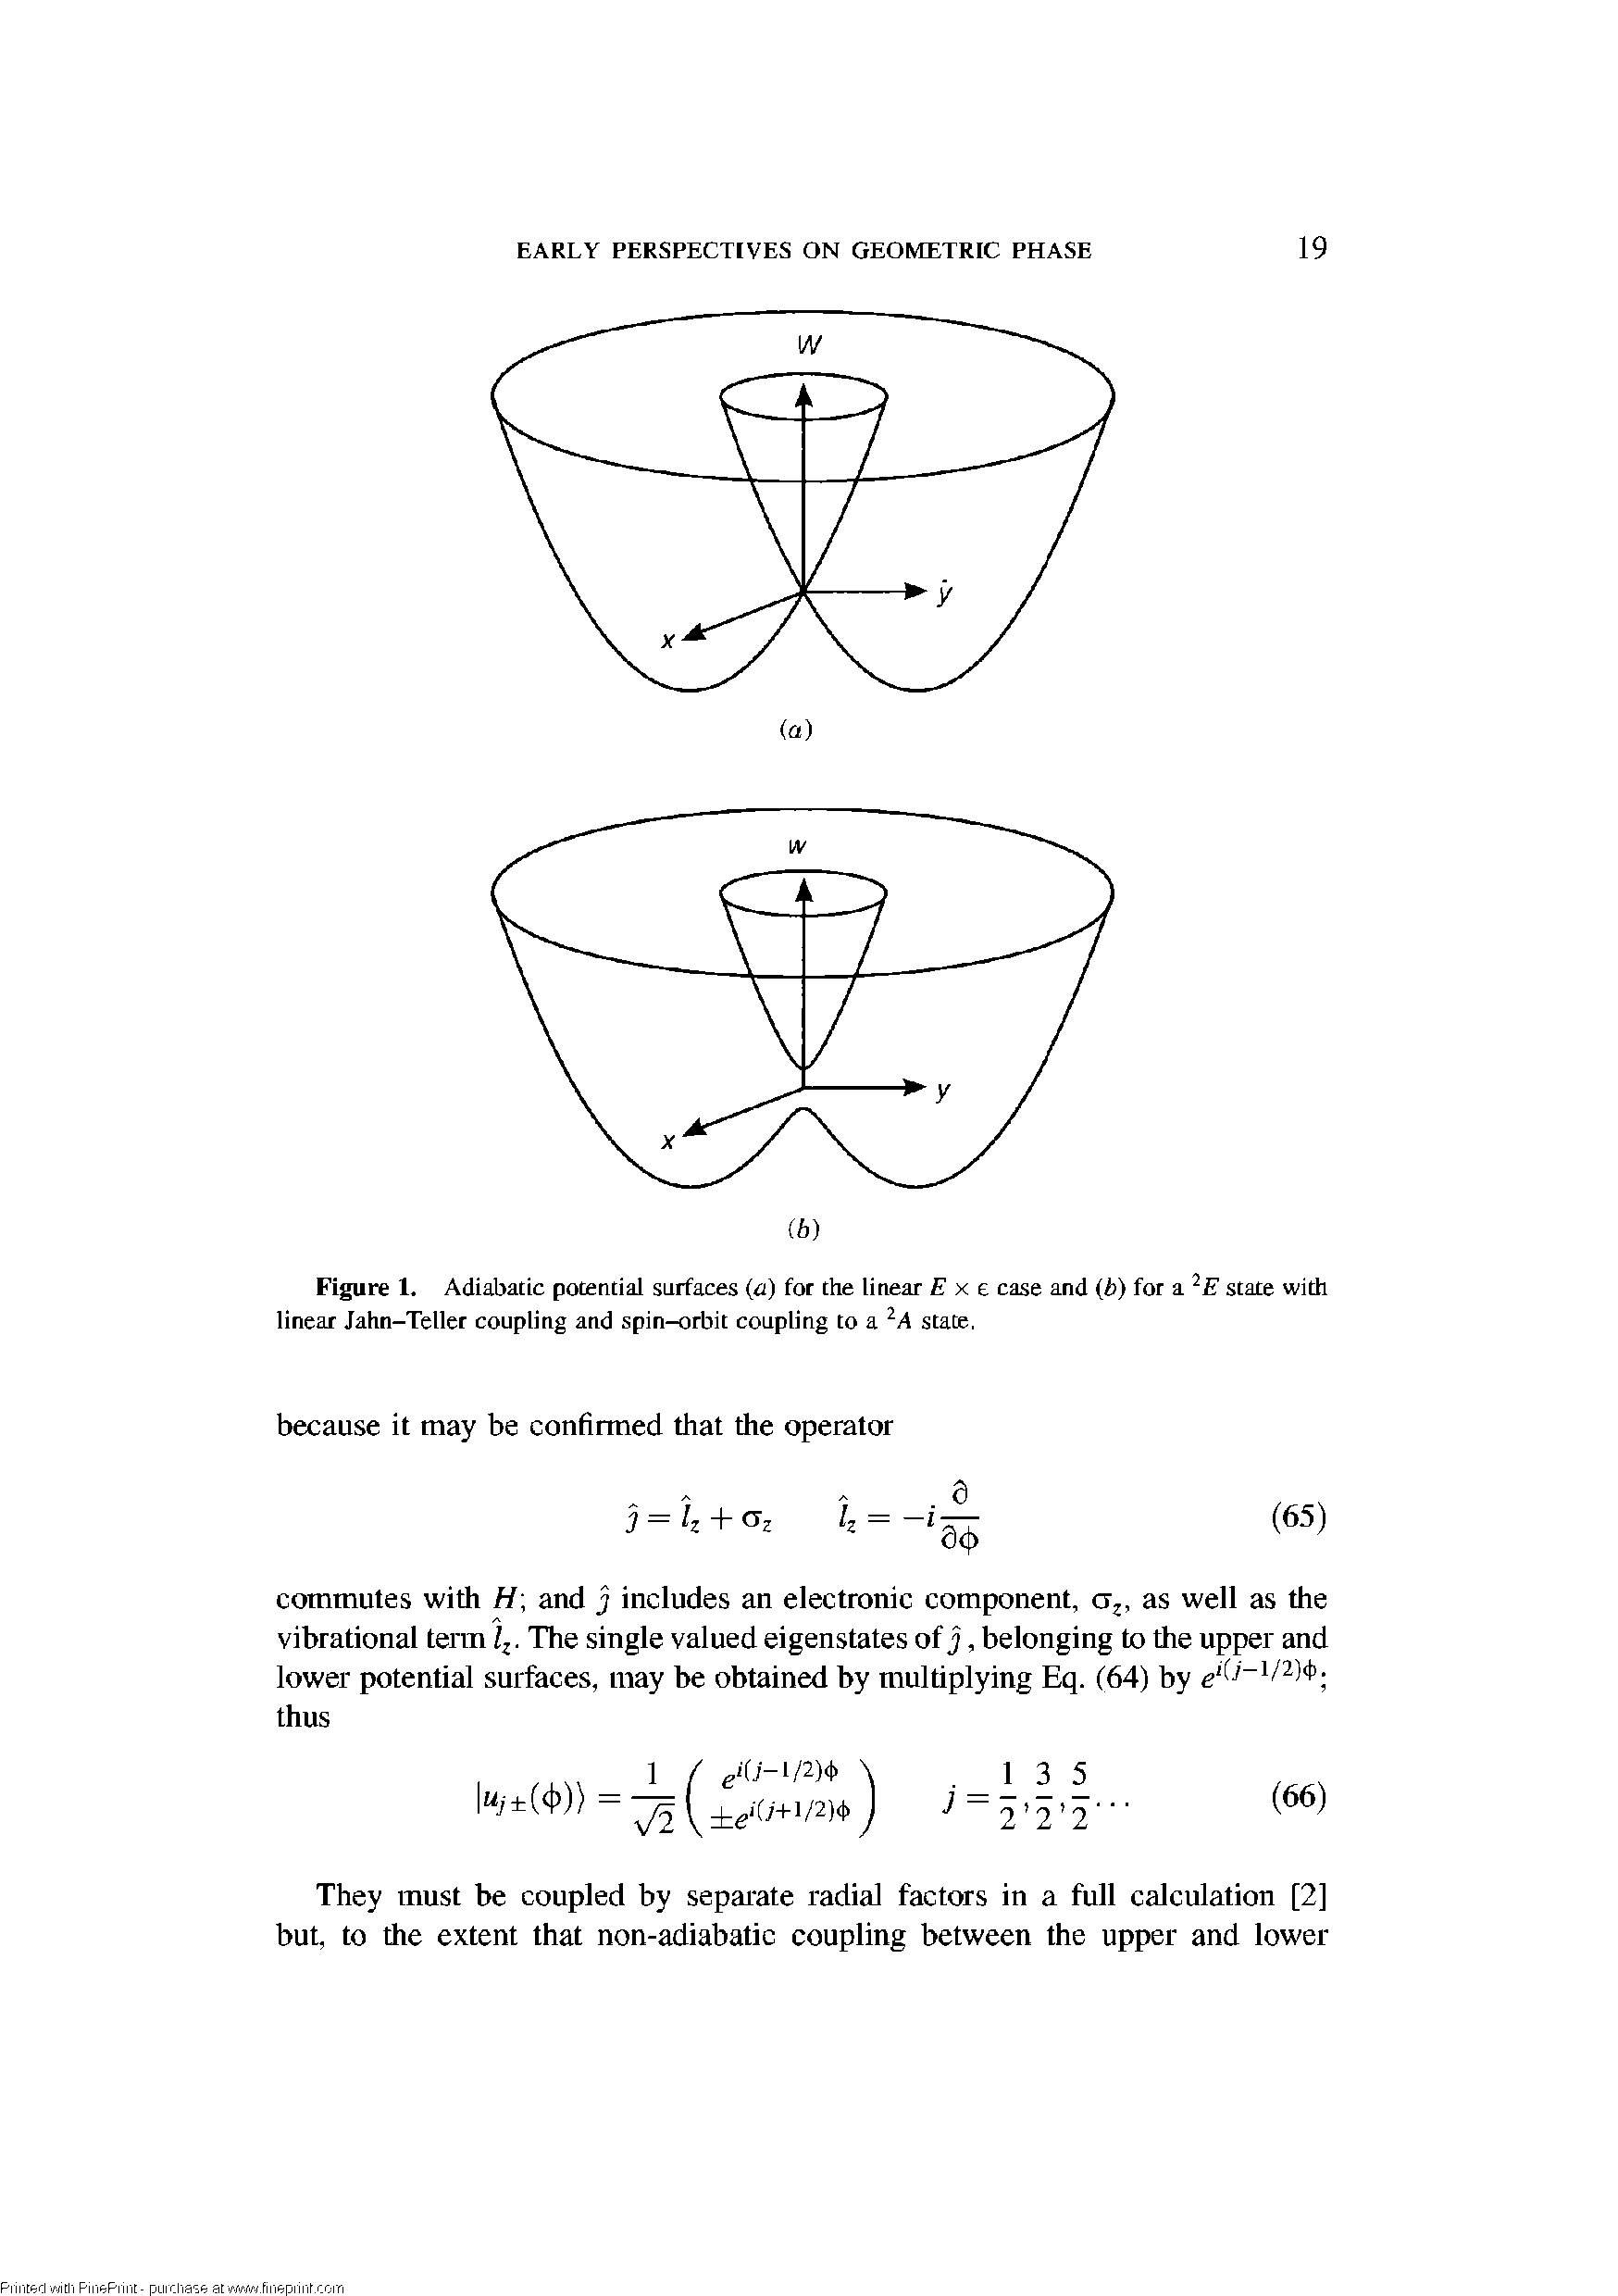 Figure 1. Adiabatic potential surfaces (a) for the linear E x e case and (b) for a state with linear Jahn-Teller coupling and spin-orbit coupling to a state,...